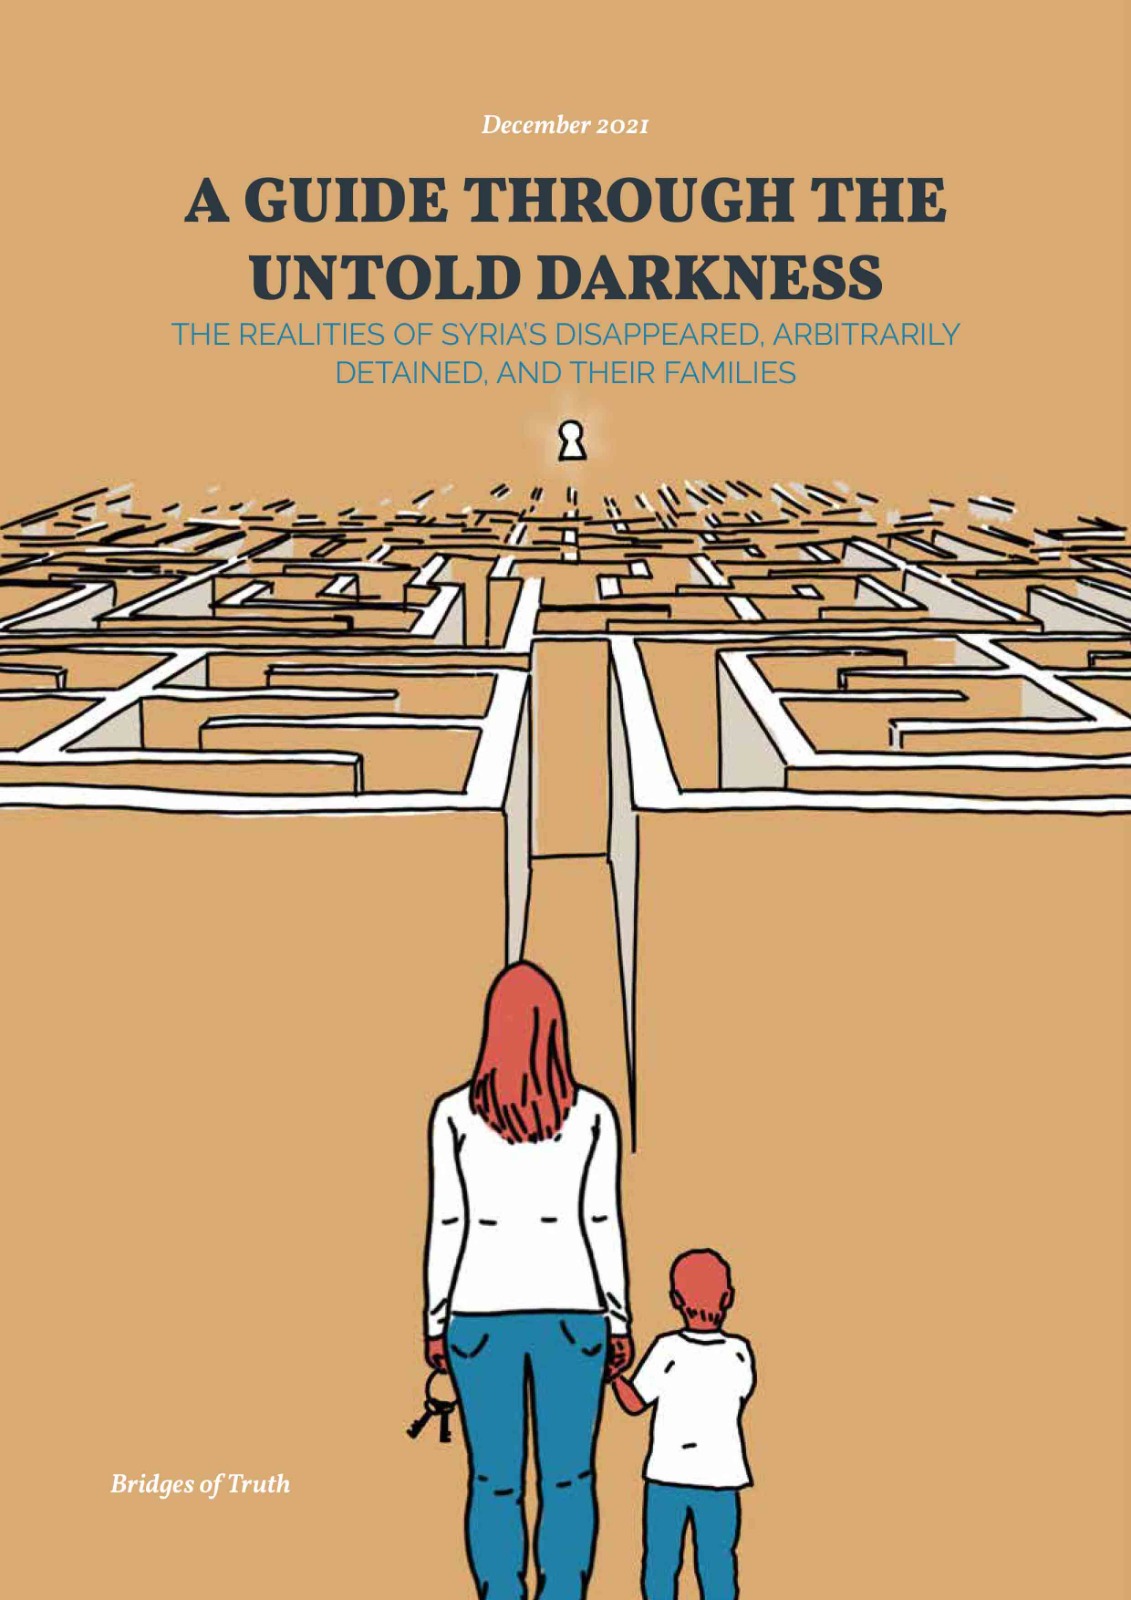 Audio Book | “A GUIDE THROUGH THE UNTOLD DARKNESS”